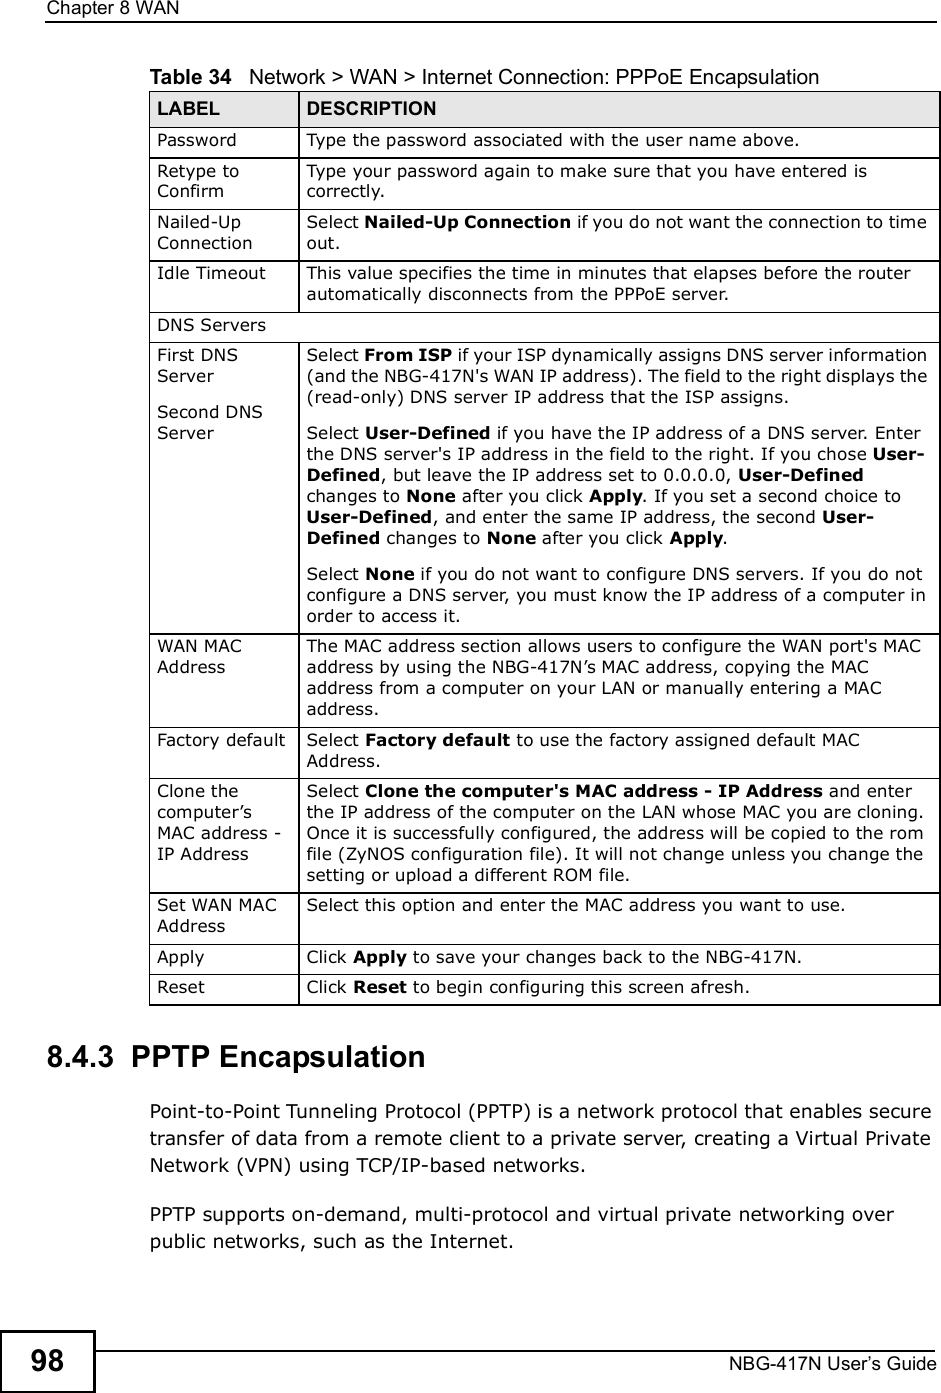 Chapter 8WANNBG-417N User s Guide988.4.3  PPTP EncapsulationPoint-to-Point Tunneling Protocol (PPTP) is a network protocol that enables secure transfer of data from a remote client to a private server, creating a Virtual Private Network (VPN) using TCP/IP-based networks.PPTP supports on-demand, multi-protocol and virtual private networking over public networks, such as the Internet.Password Type the password associated with the user name above.Retype to ConfirmType your password again to make sure that you have entered is correctly. Nailed-Up ConnectionSelect Nailed-Up Connection if you do not want the connection to time out.Idle Timeout This value specifies the time in minutes that elapses before the router automatically disconnects from the PPPoE server.DNS ServersFirst DNS ServerSecond DNS Server Select From ISP if your ISP dynamically assigns DNS server information (and the NBG-417N&apos;s WAN IP address). The field to the right displays the (read-only) DNS server IP address that the ISP assigns. Select User-Defined if you have the IP address of a DNS server. Enter the DNS server&apos;s IP address in the field to the right. If you chose User-Defined, but leave the IP address set to 0.0.0.0, User-Defined changes to None after you click Apply. If you set a second choice to User-Defined, and enter the same IP address, the second User-Defined changes to None after you click Apply. Select None if you do not want to configure DNS servers. If you do not configure a DNS server, you must know the IP address of a computer in order to access it.WAN MAC AddressThe MAC address section allows users to configure the WAN port&apos;s MAC address by using the NBG-417N!s MAC address, copying the MAC address from a computer on your LAN or manually entering a MAC address. Factory default Select Factory default to use the factory assigned default MAC Address.Clone the computer!s MAC address - IP AddressSelect Clone the computer&apos;s MAC address - IP Address and enter the IP address of the computer on the LAN whose MAC you are cloning. Once it is successfully configured, the address will be copied to the rom file (ZyNOS configuration file). It will not change unless you change the setting or upload a different ROM file. Set WAN MAC AddressSelect this option and enter the MAC address you want to use.Apply Click Apply to save your changes back to the NBG-417N.Reset Click Reset to begin configuring this screen afresh.Table 34   Network &gt; WAN &gt; Internet Connection: PPPoE EncapsulationLABEL DESCRIPTION